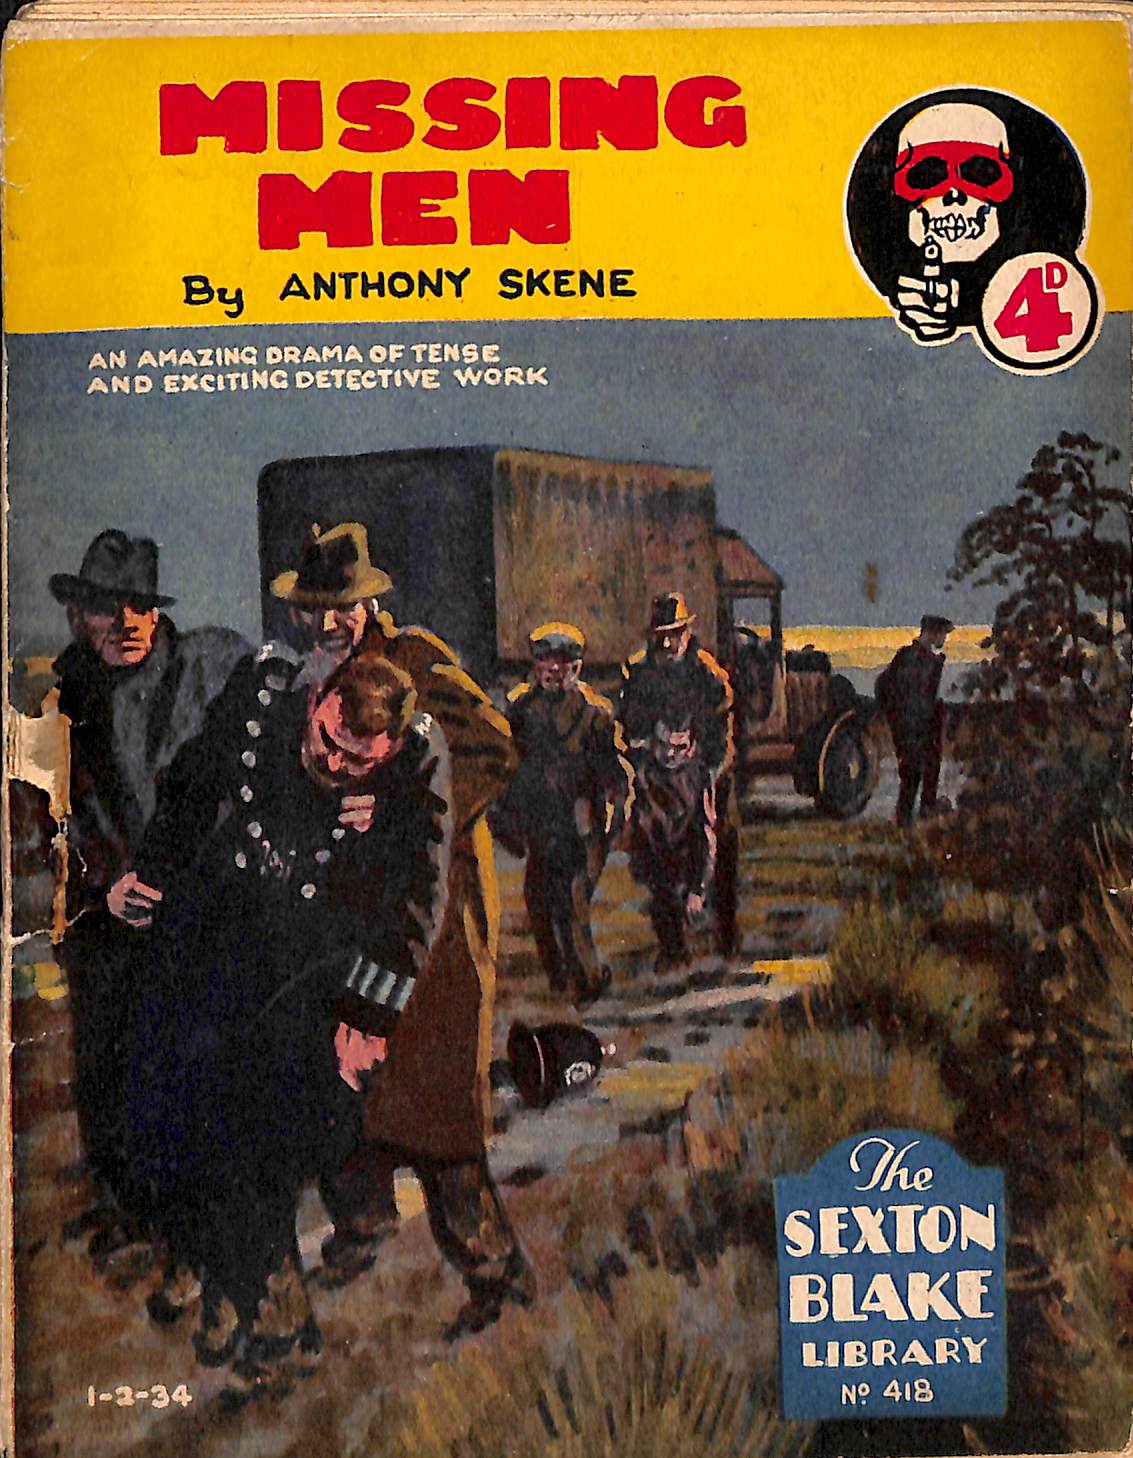 Book Cover For Sexton Blake Library S2 418 - Missing Men